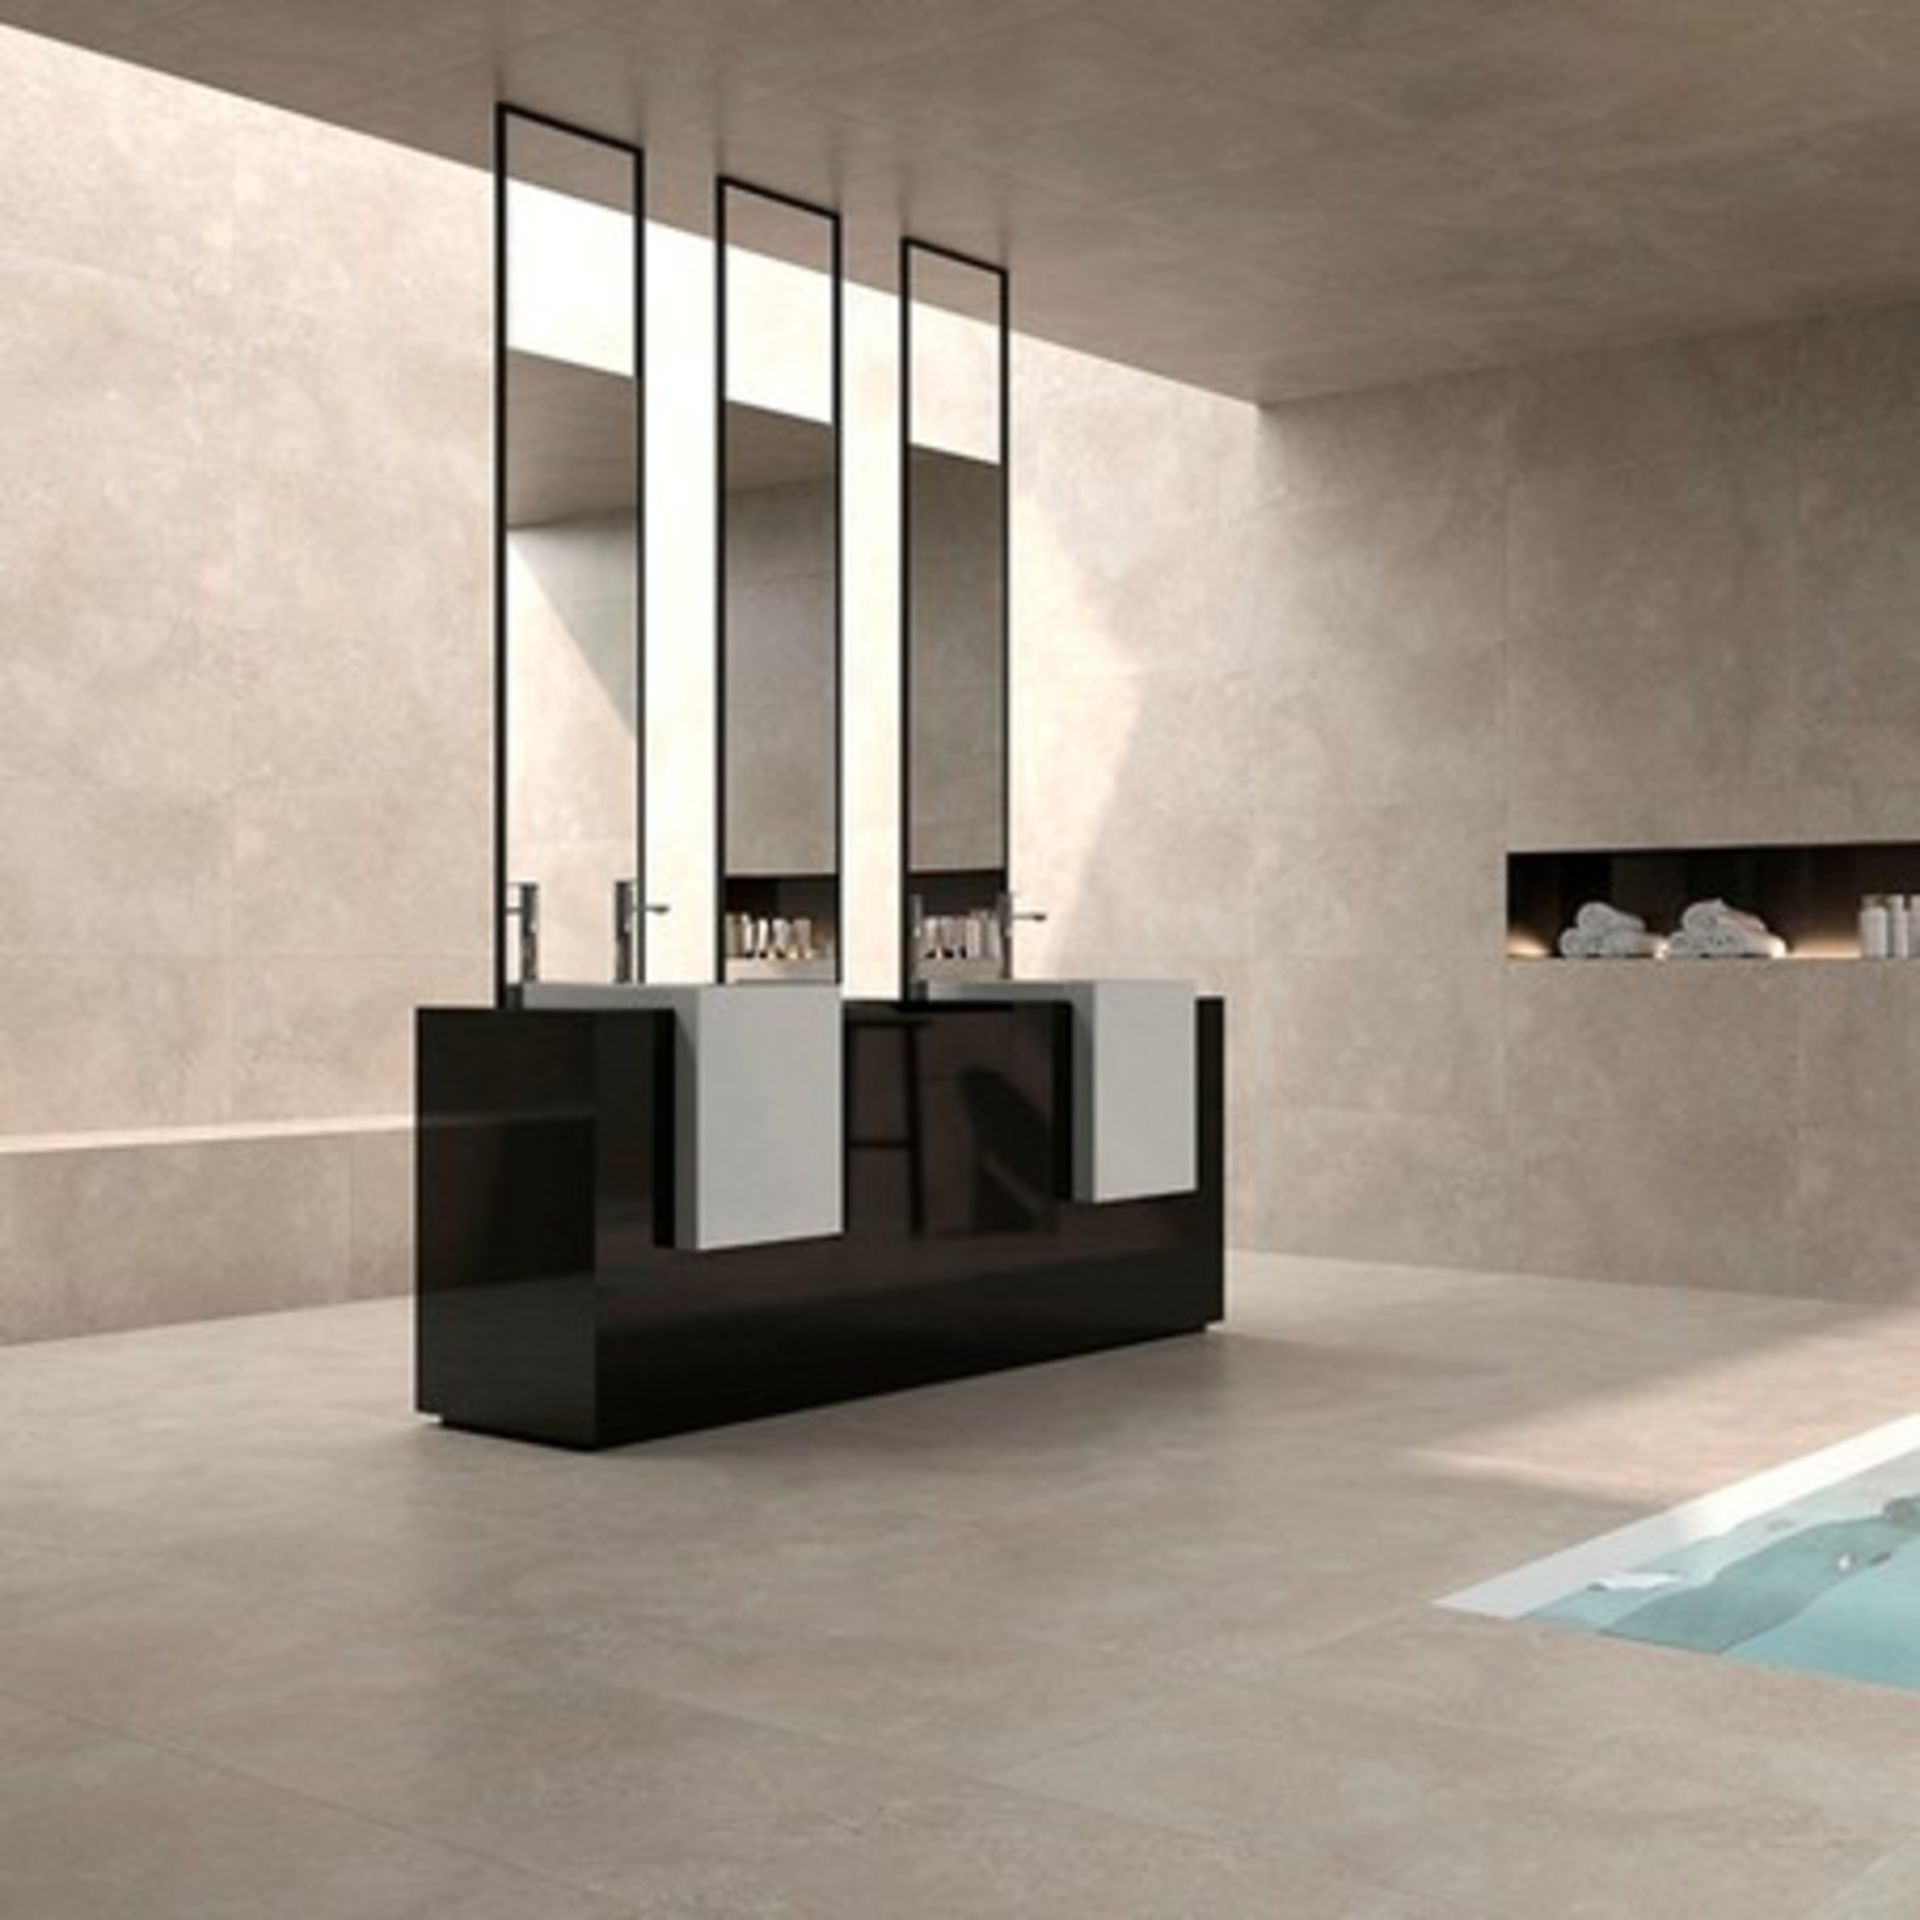 NEW 8.64m2 Veinstone Beige Polished Wall and Floor Tiles. 300x600mm, 1.08m2 per pack. If your l... - Image 3 of 3